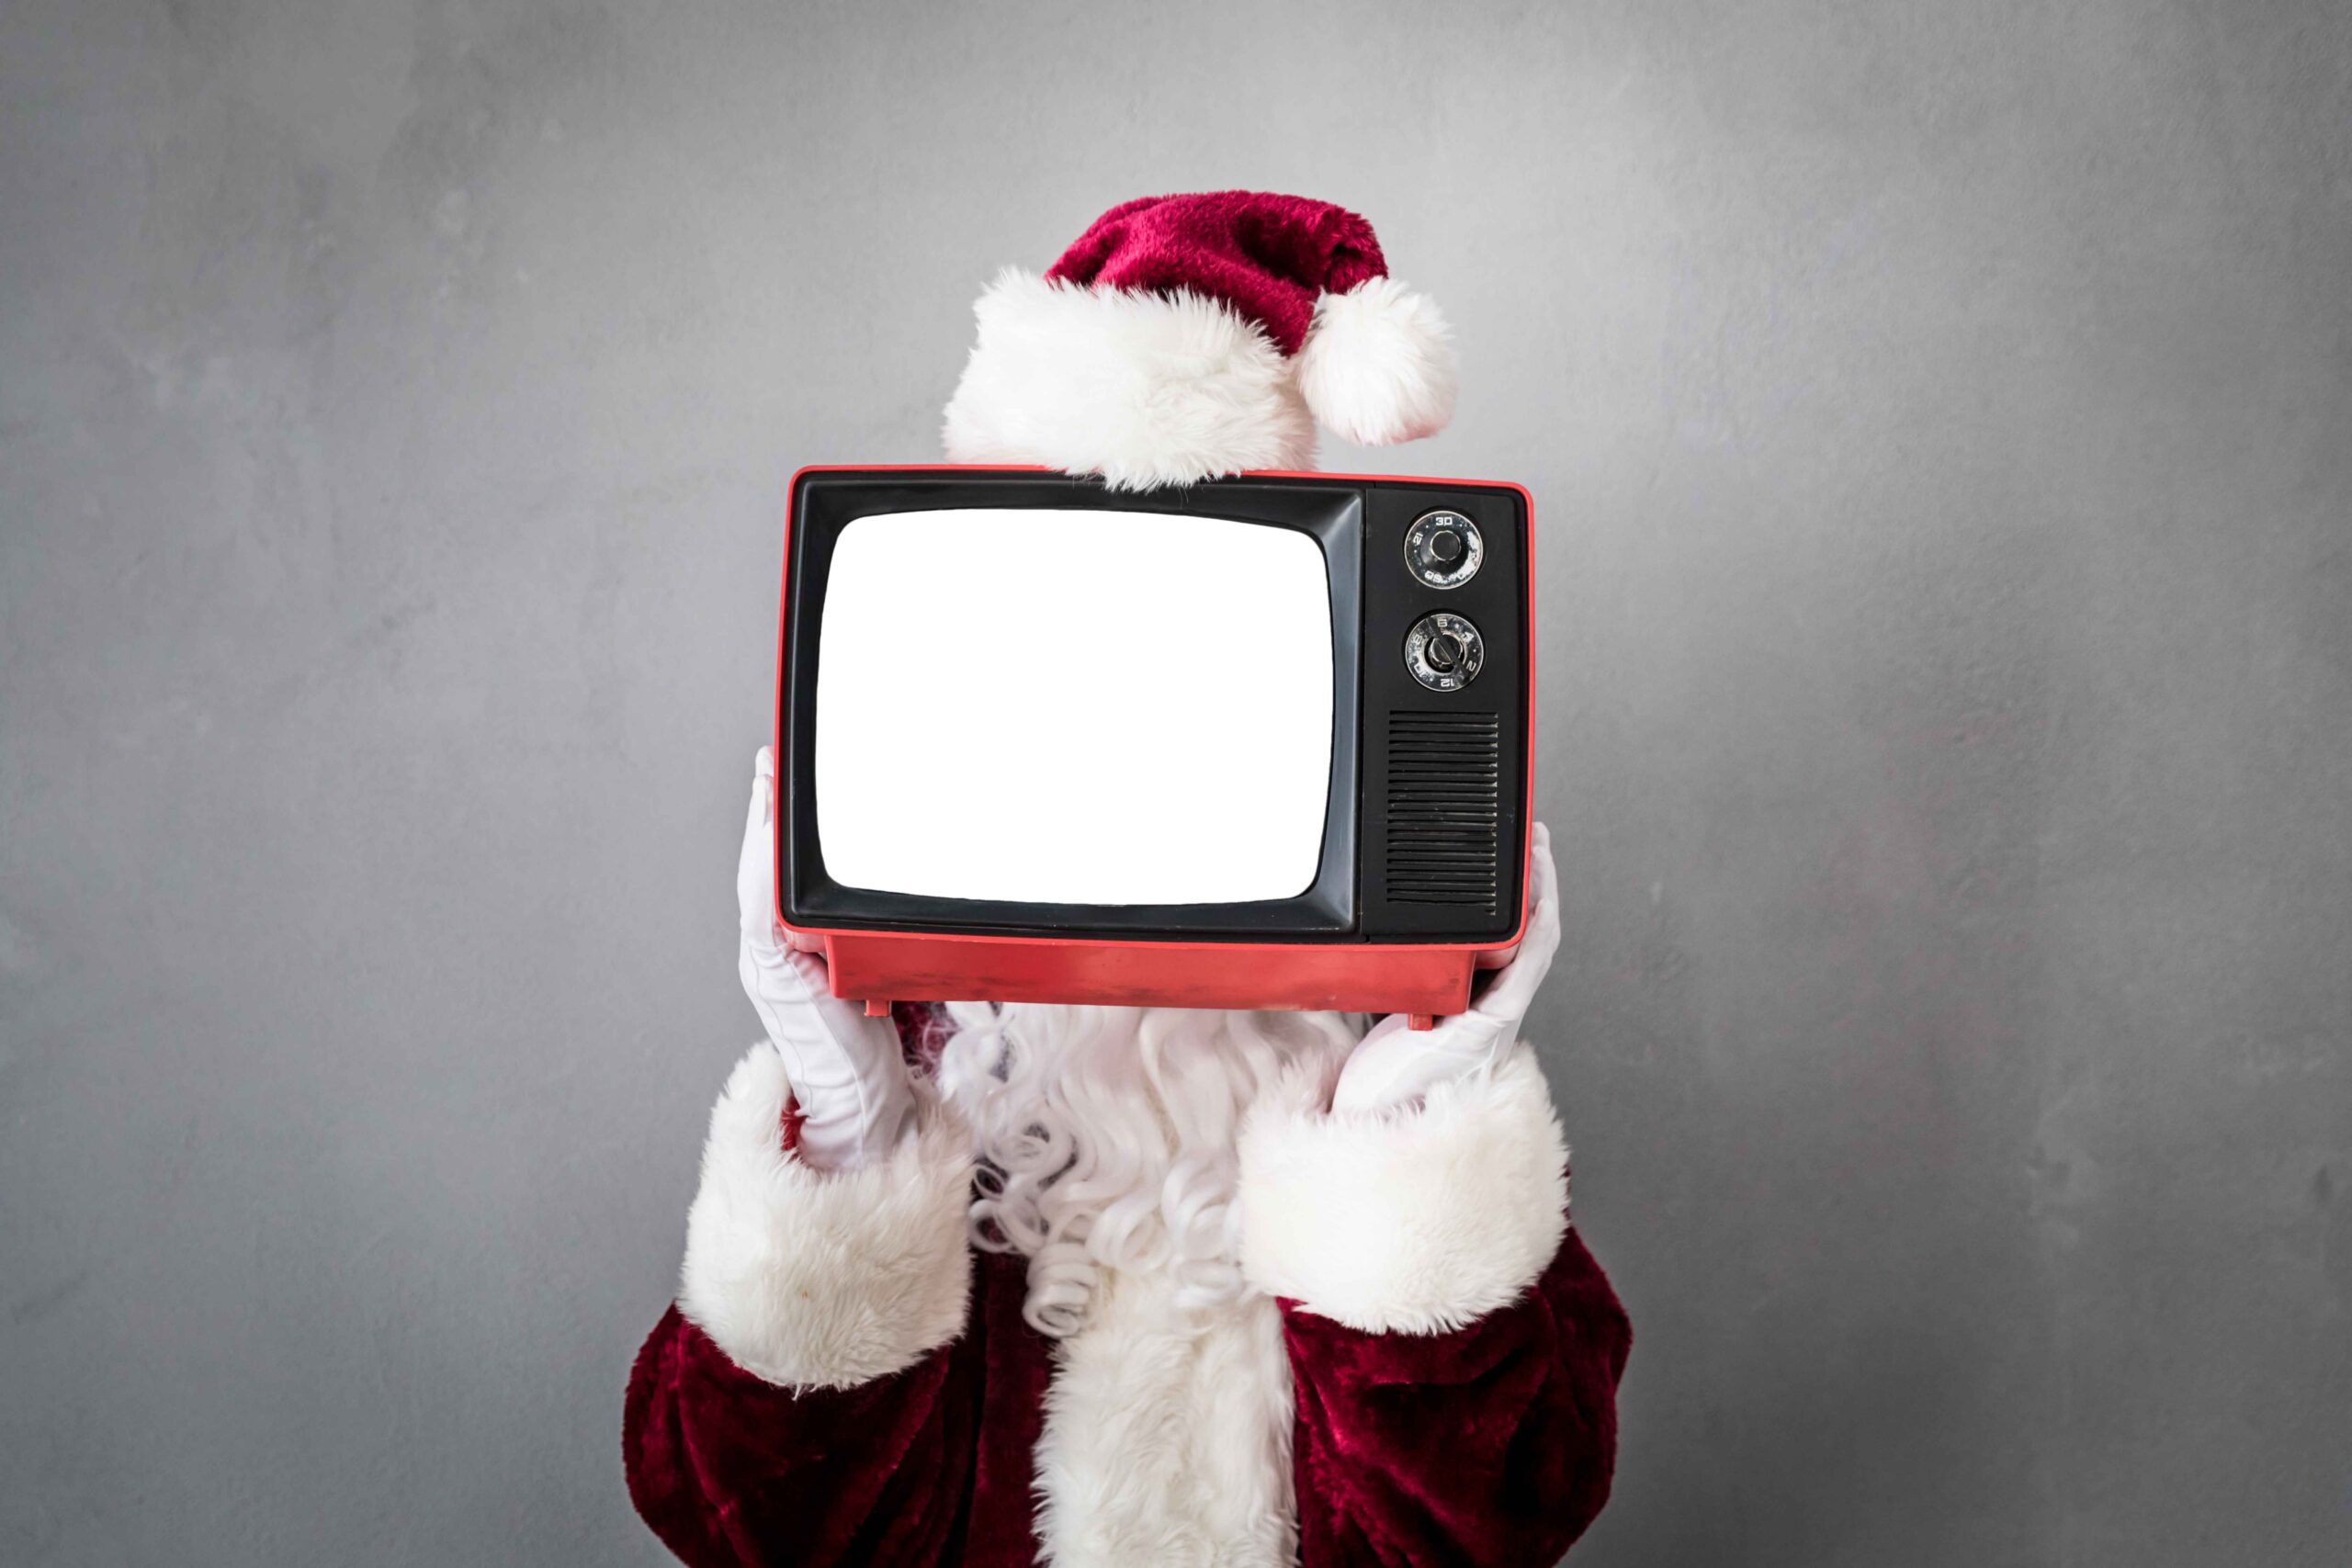 Why do we care about Christmas adverts?